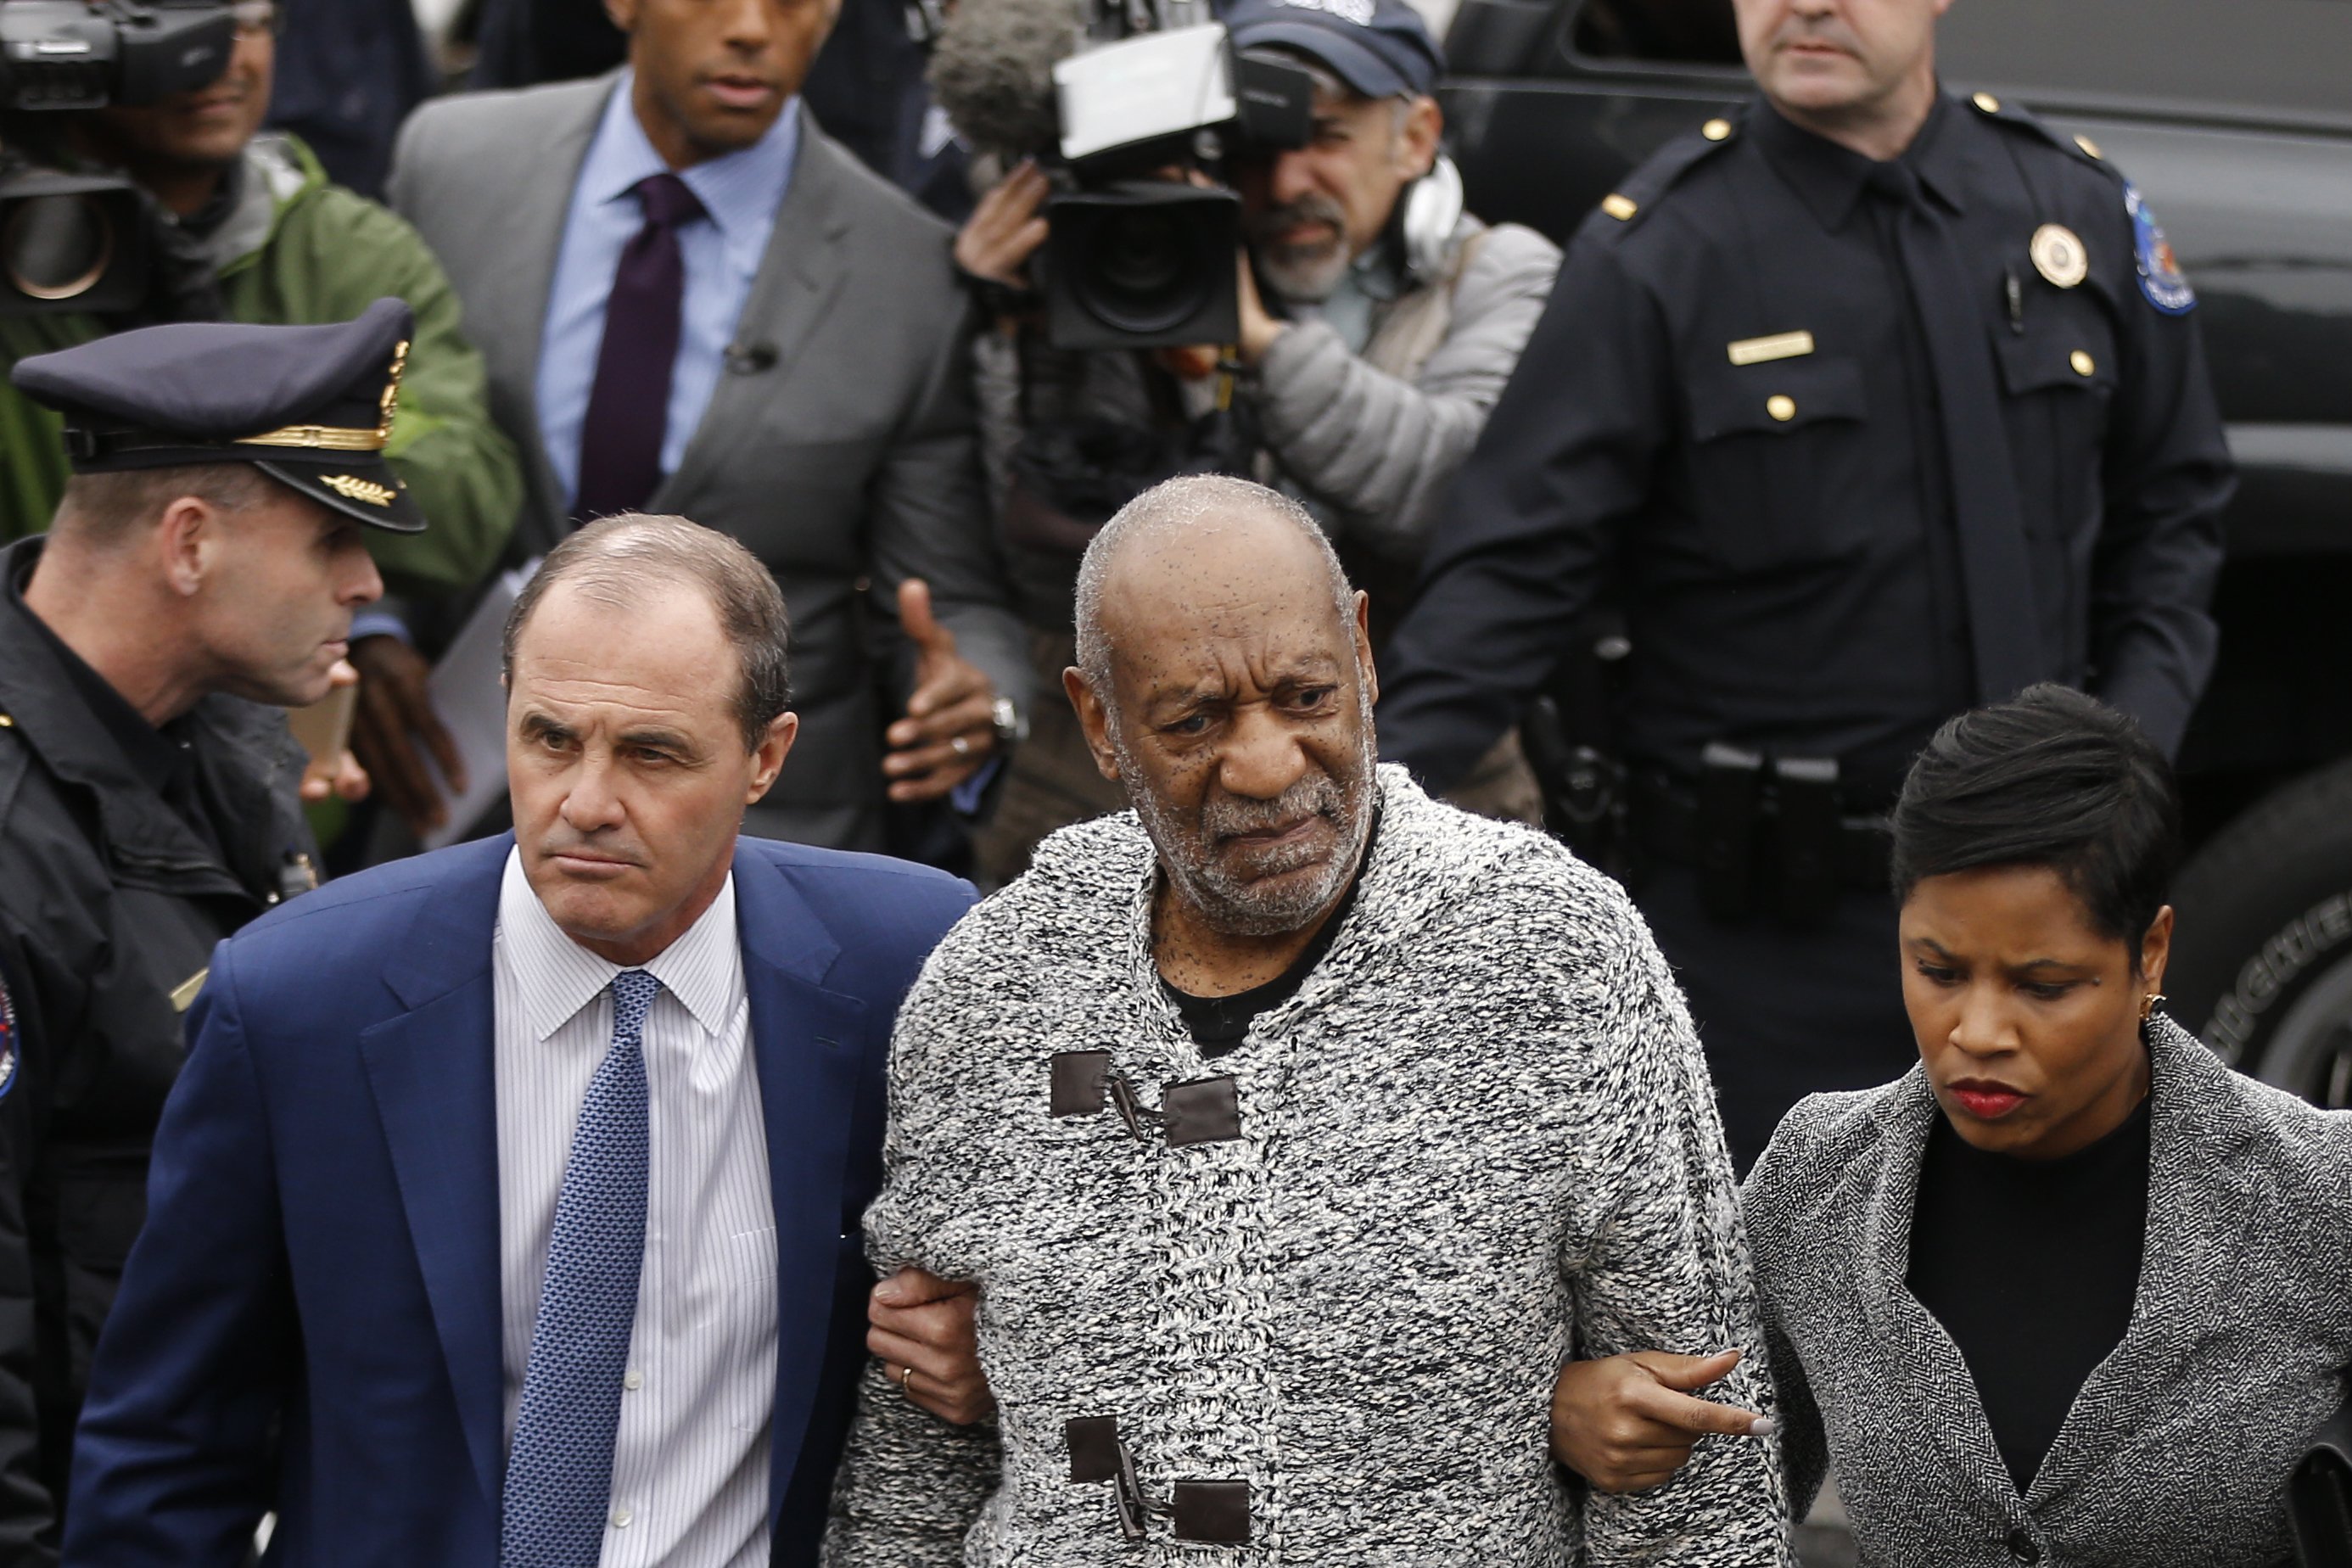 Bill Cosby, accompanied by his attorneys Brian McMonagle and Monique Pressley, arrives at court to face a felony charge of aggravated indecent assault in Elkins Park, Pa., on Dec. 30, 2015. (Matt Rourke—AP)